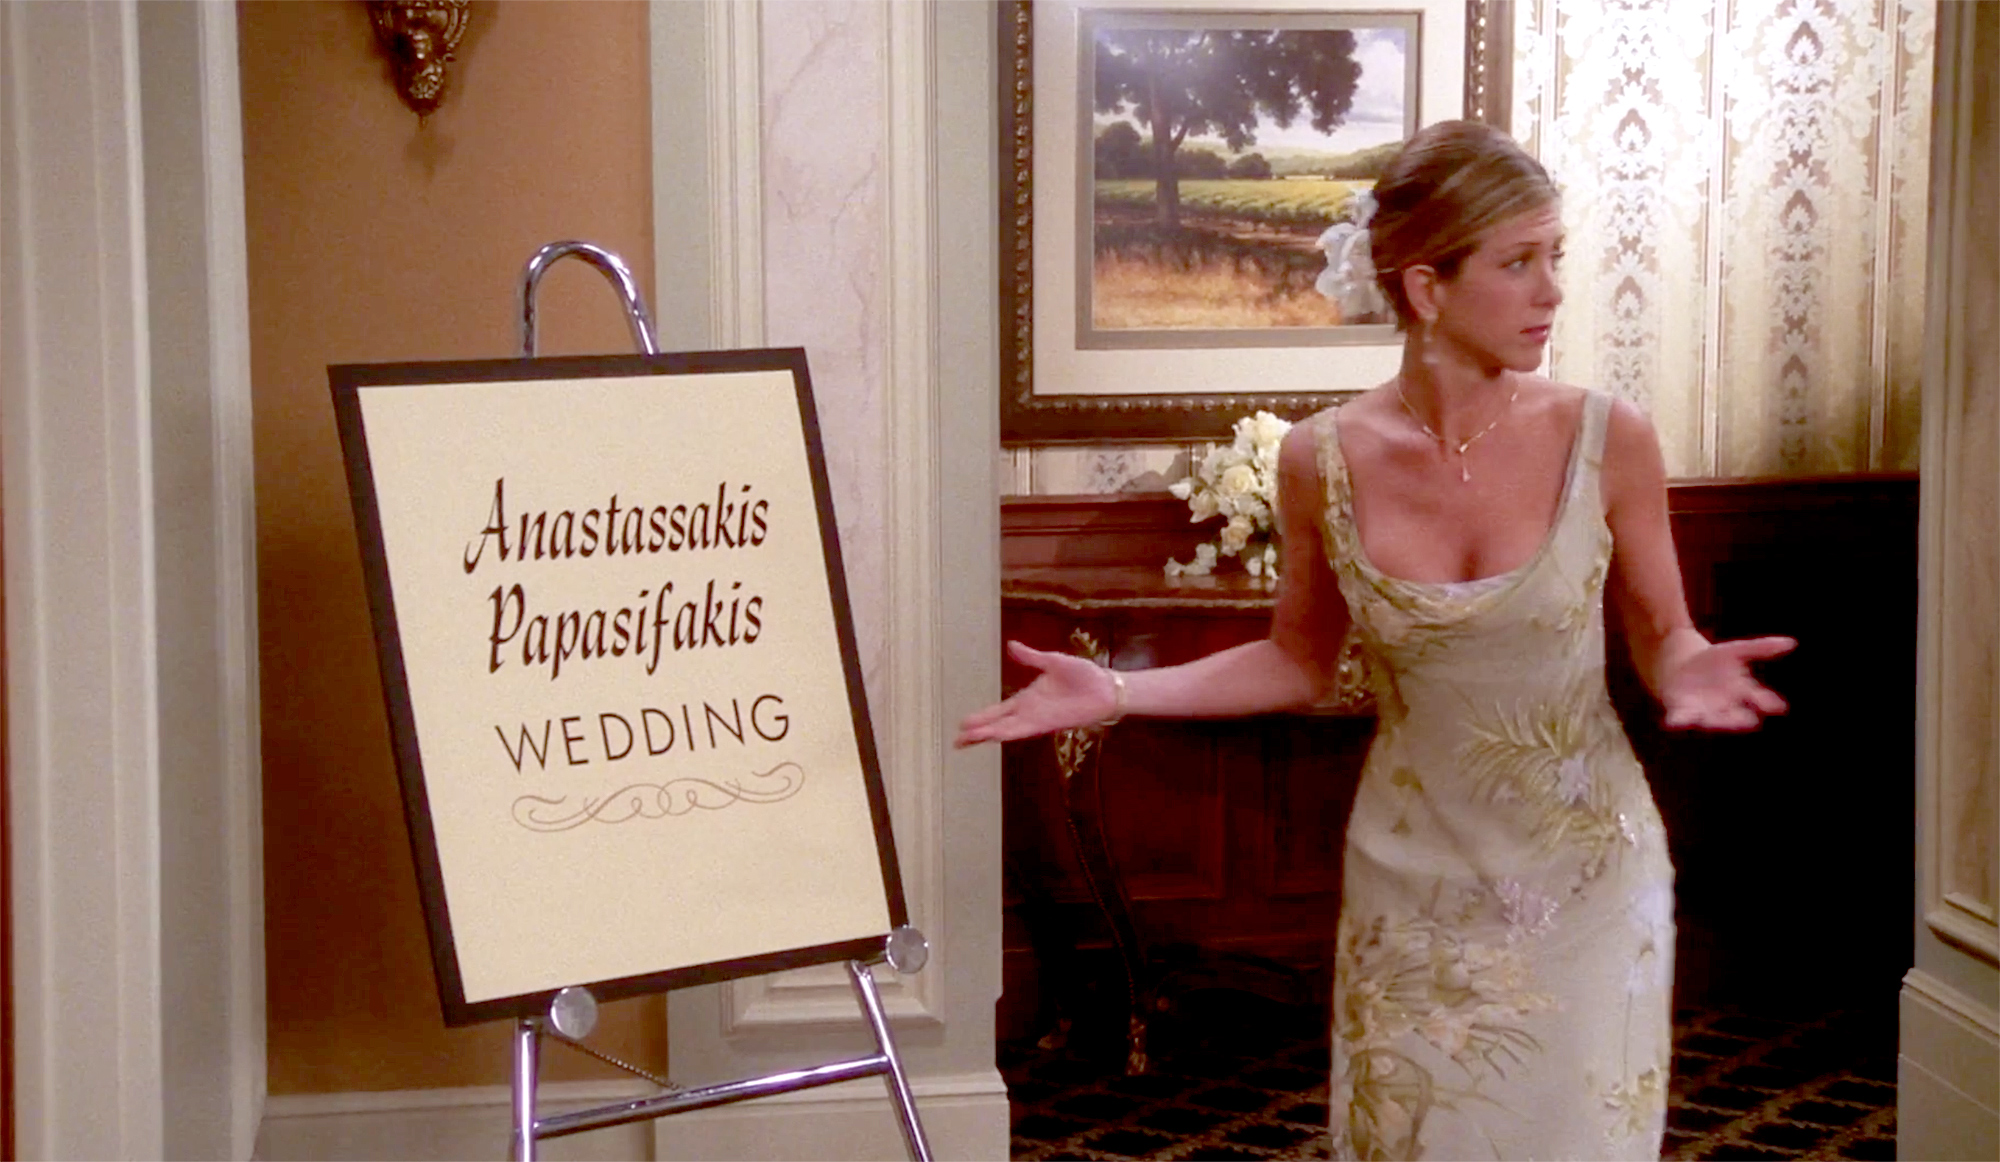 Friends Famous Wedding Episode Included a Nod to Jennifer Aniston